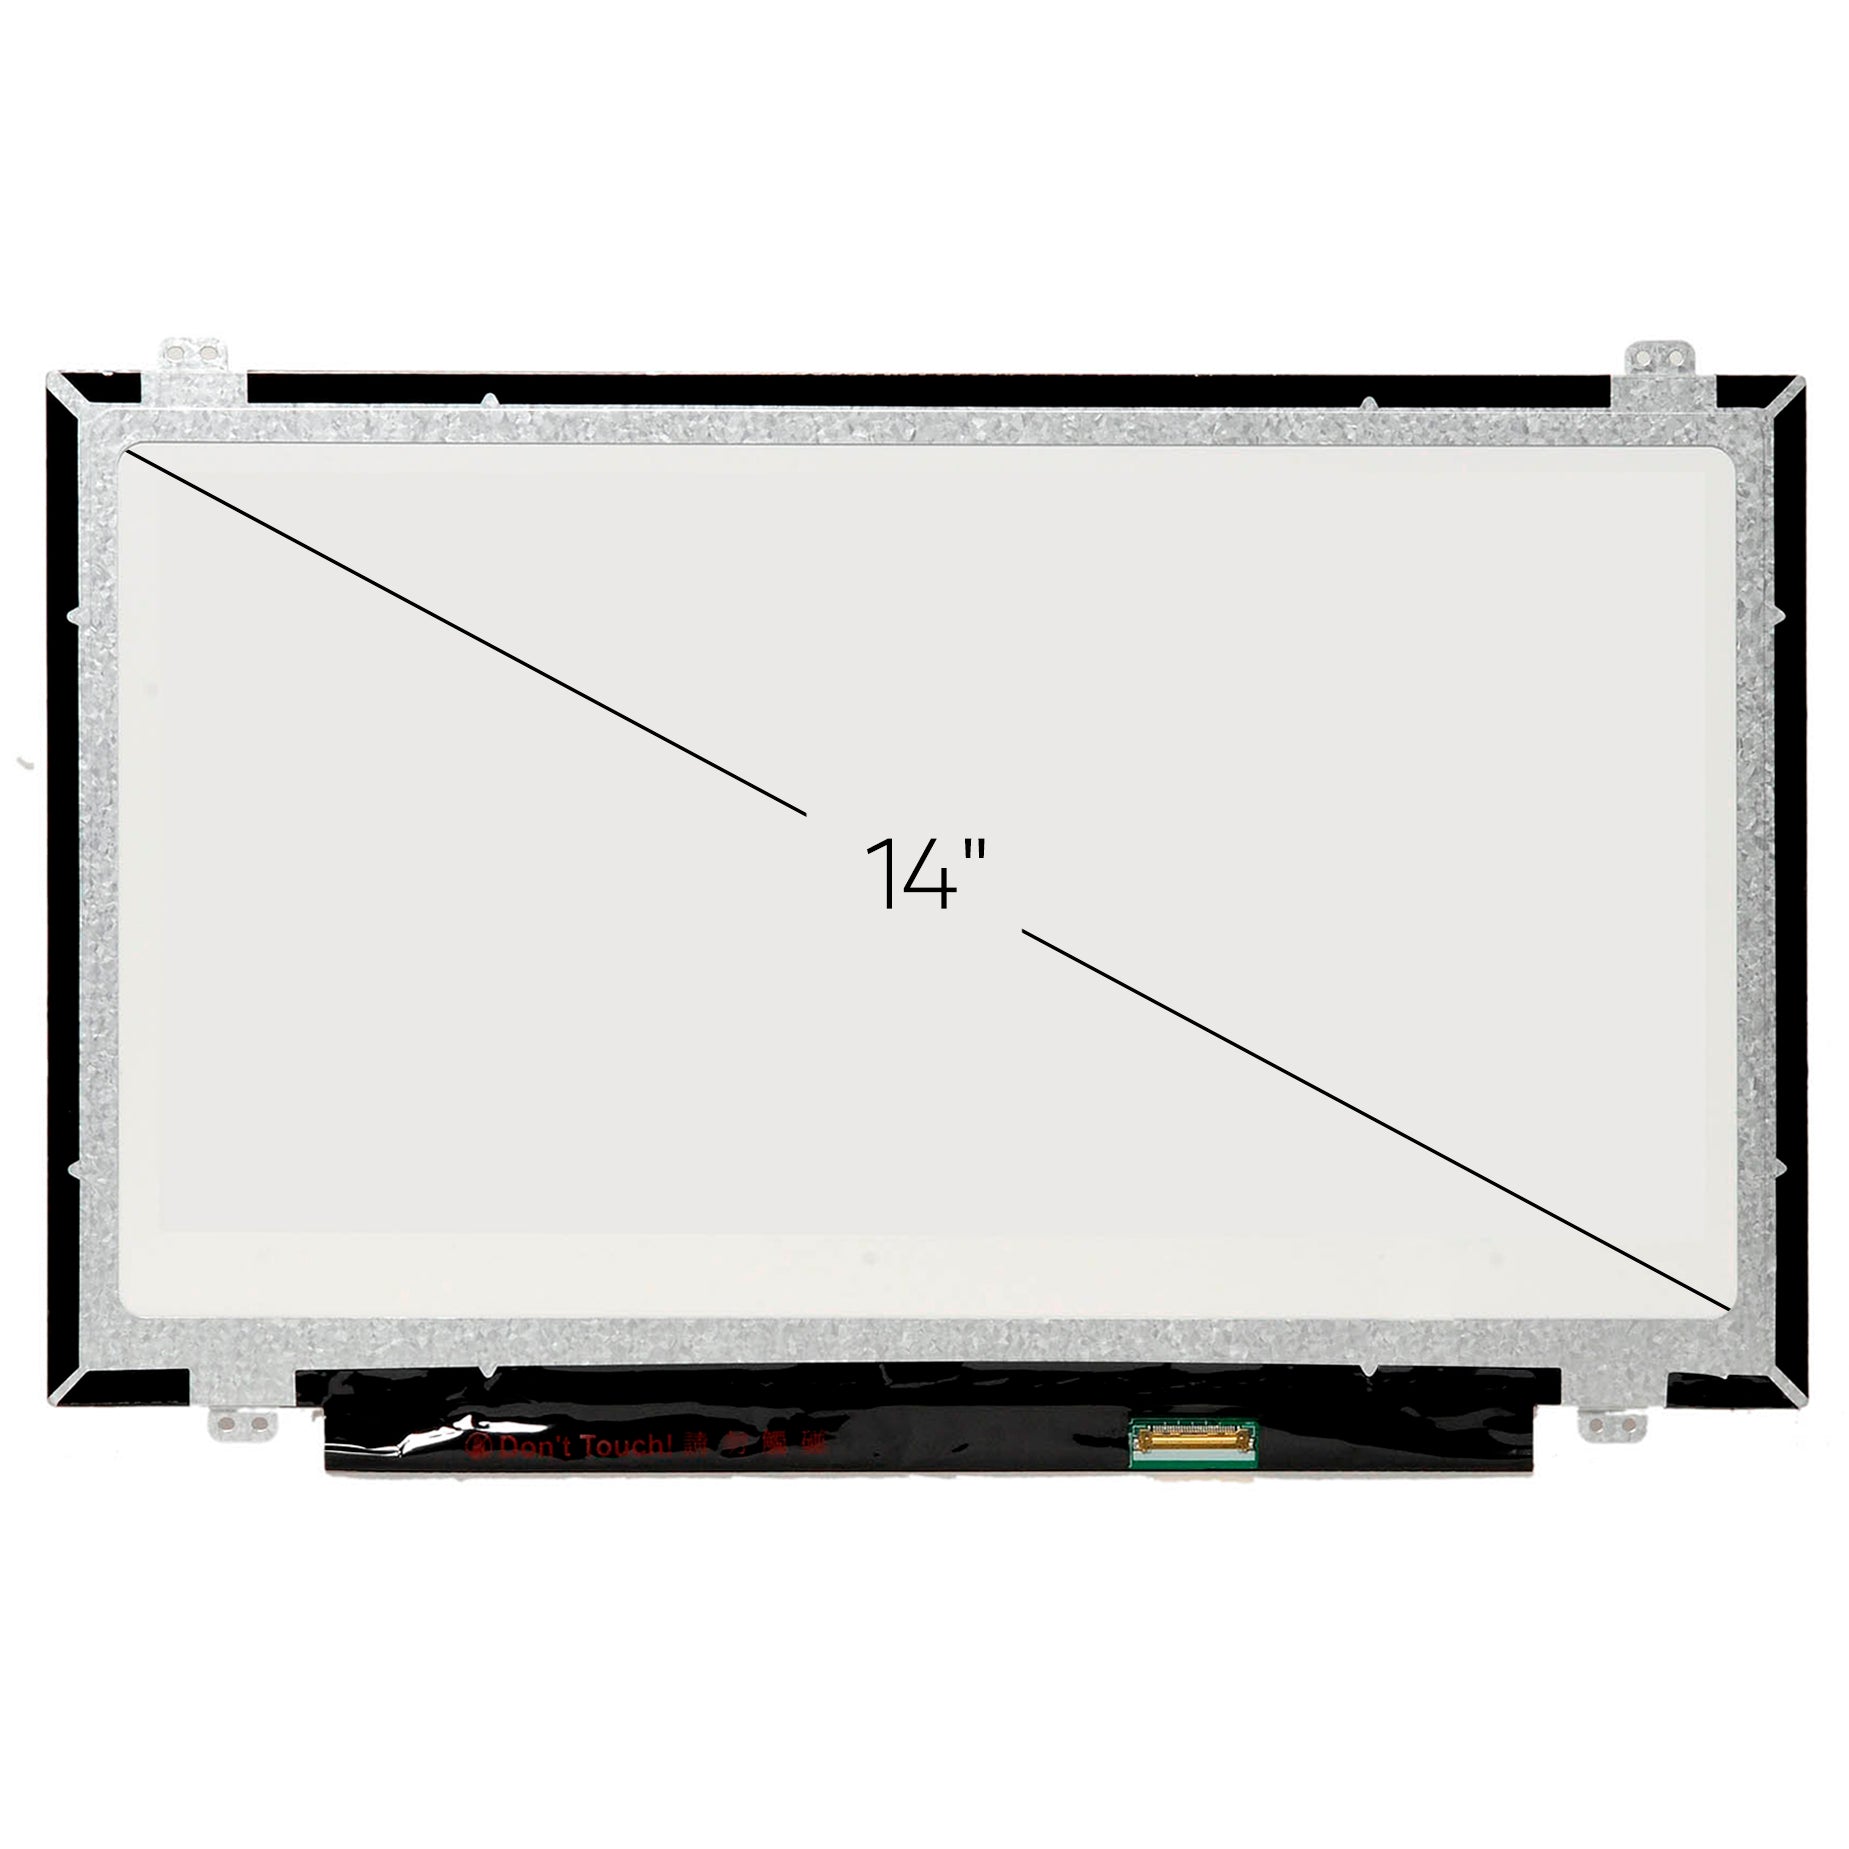 Screen Replacement for HP P/N 788509-001 HD 1366x768 Glossy LCD LED Display